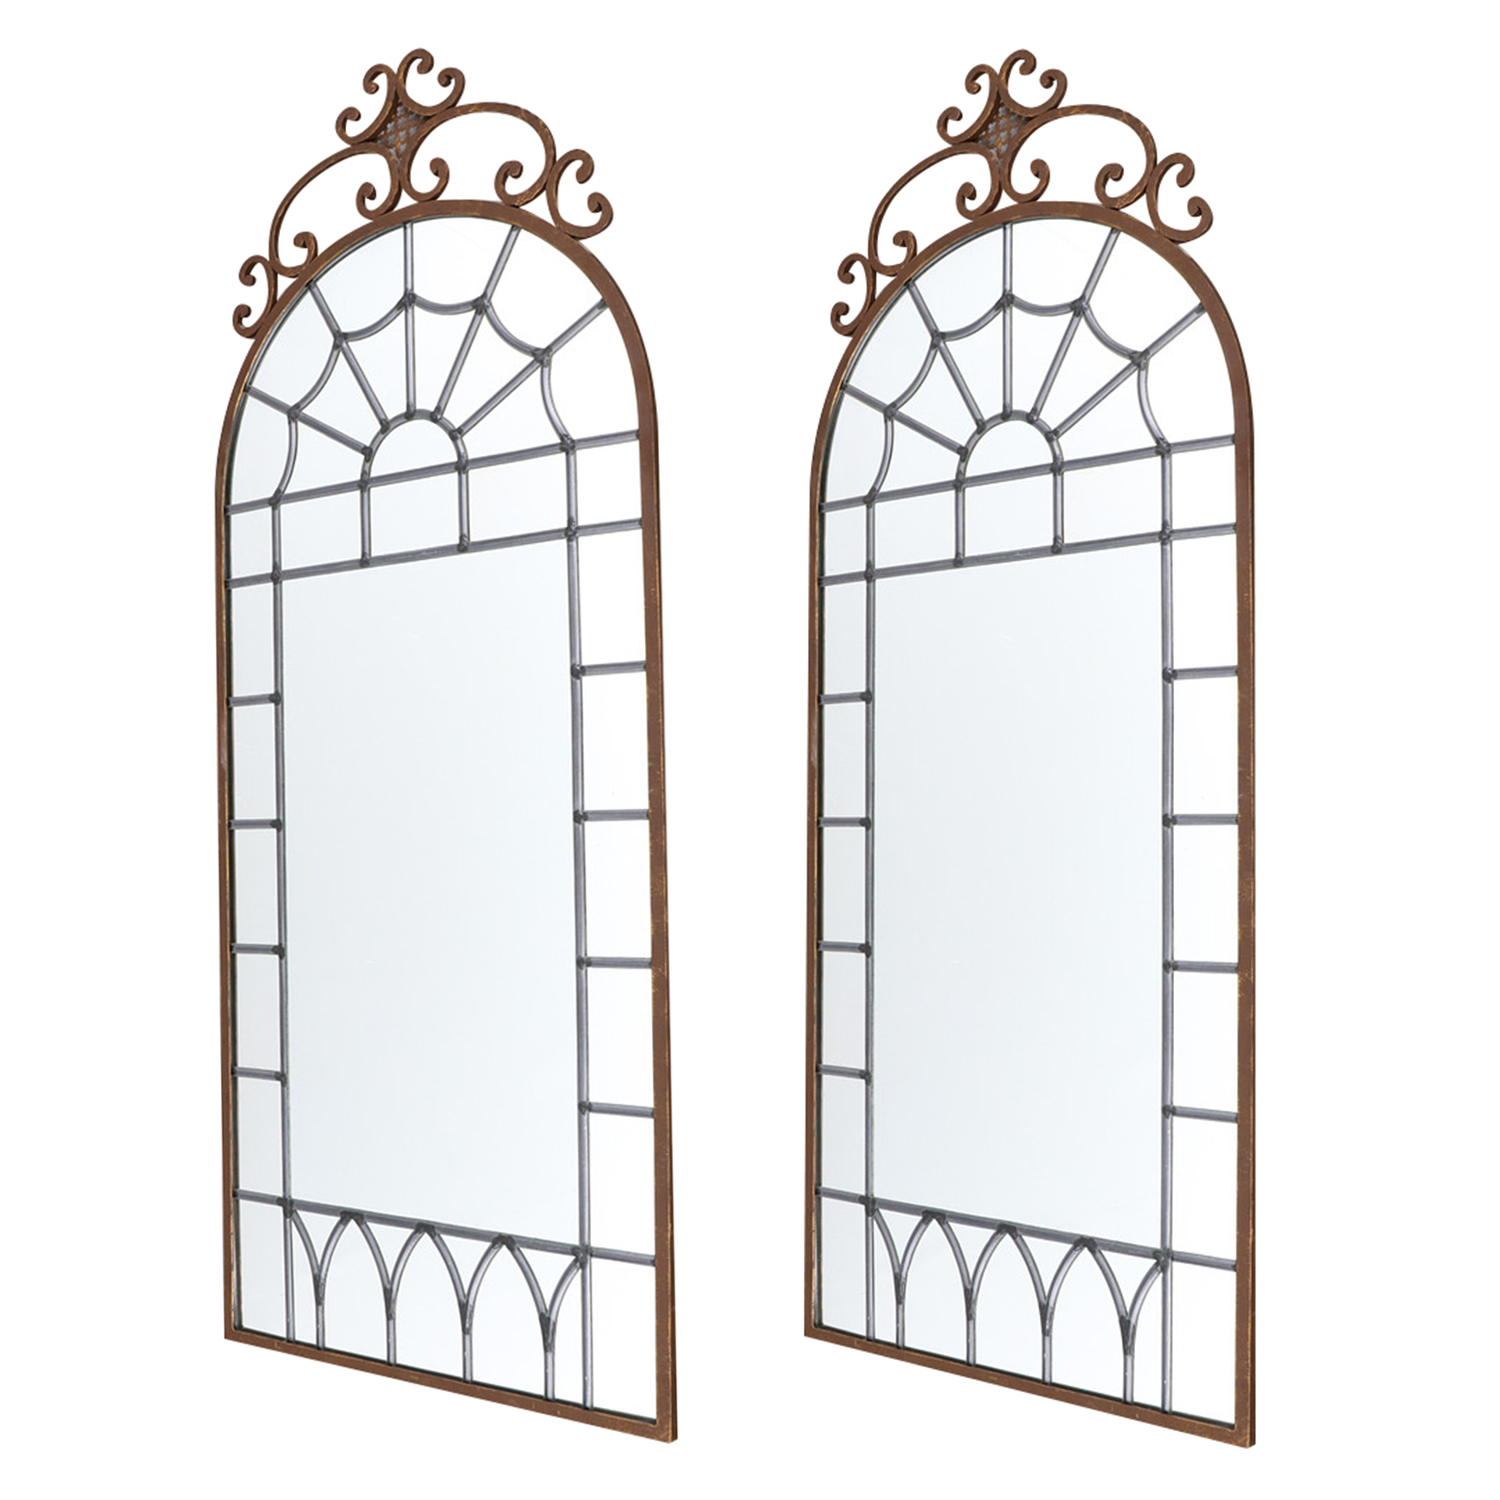 19th Century French Empire Pair of Metal Wall Glass Mirrors – Parisian Décor